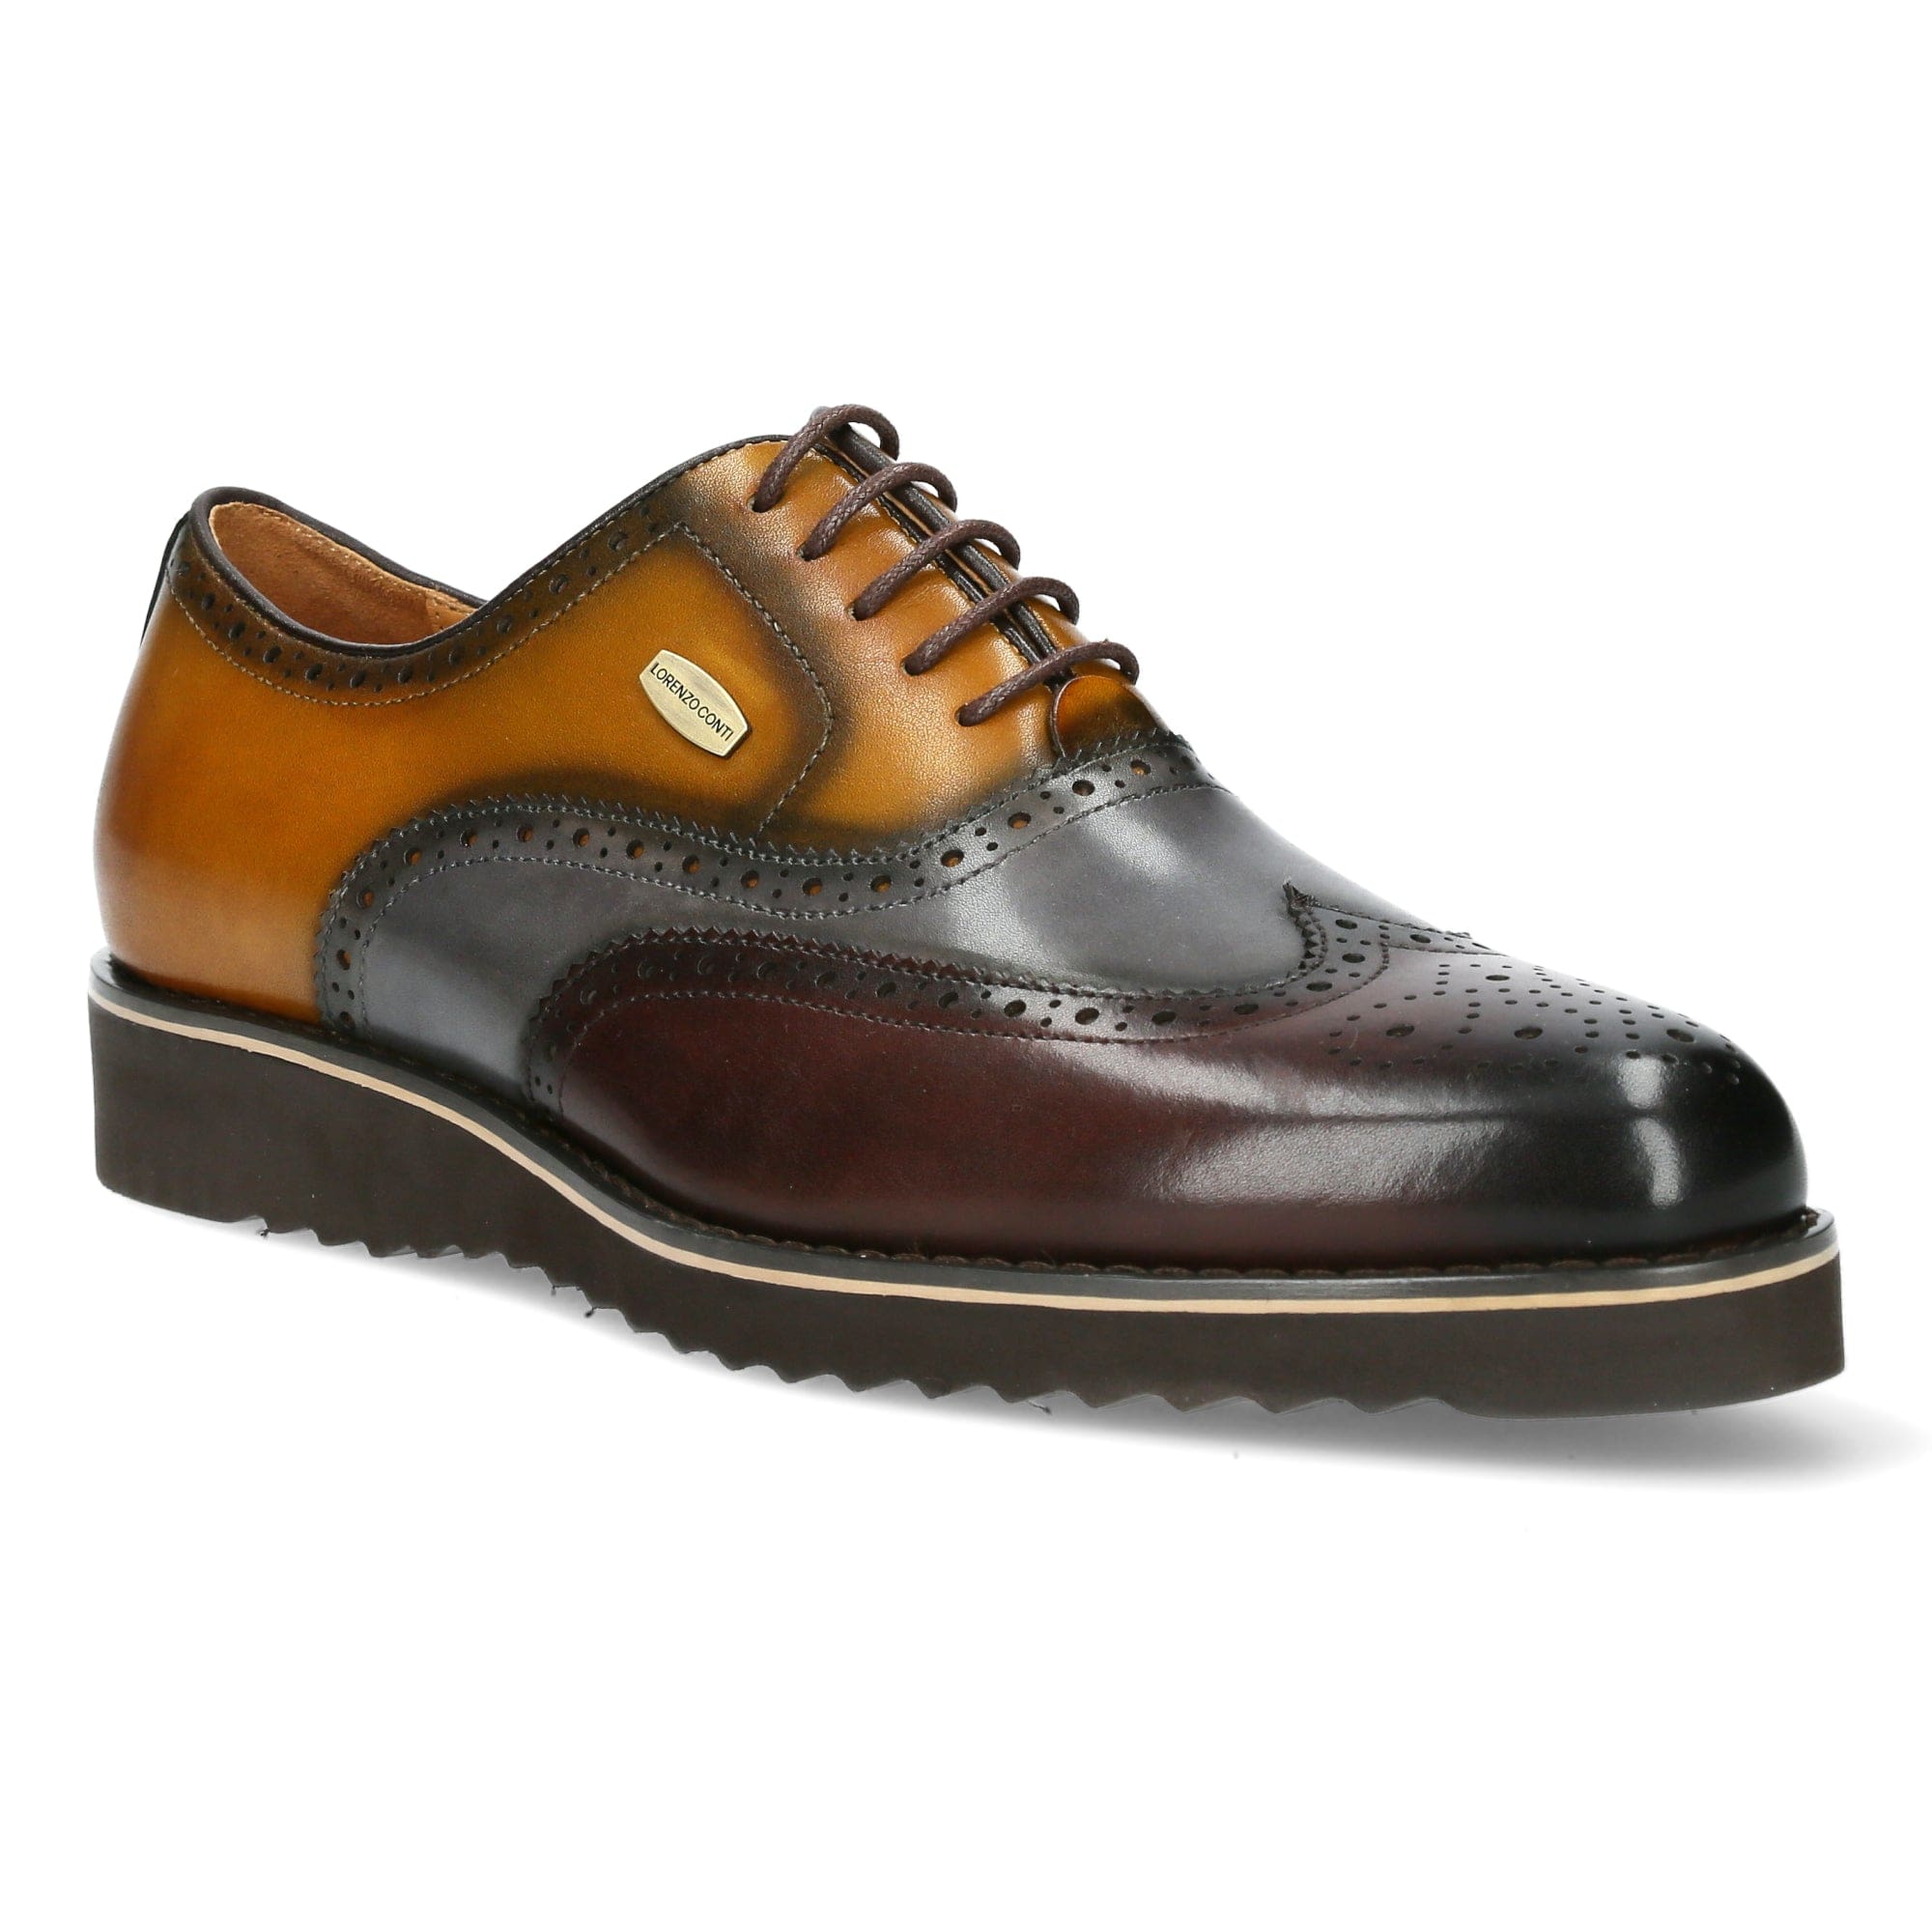 Chaussure Homme ARON 01 - Soulier